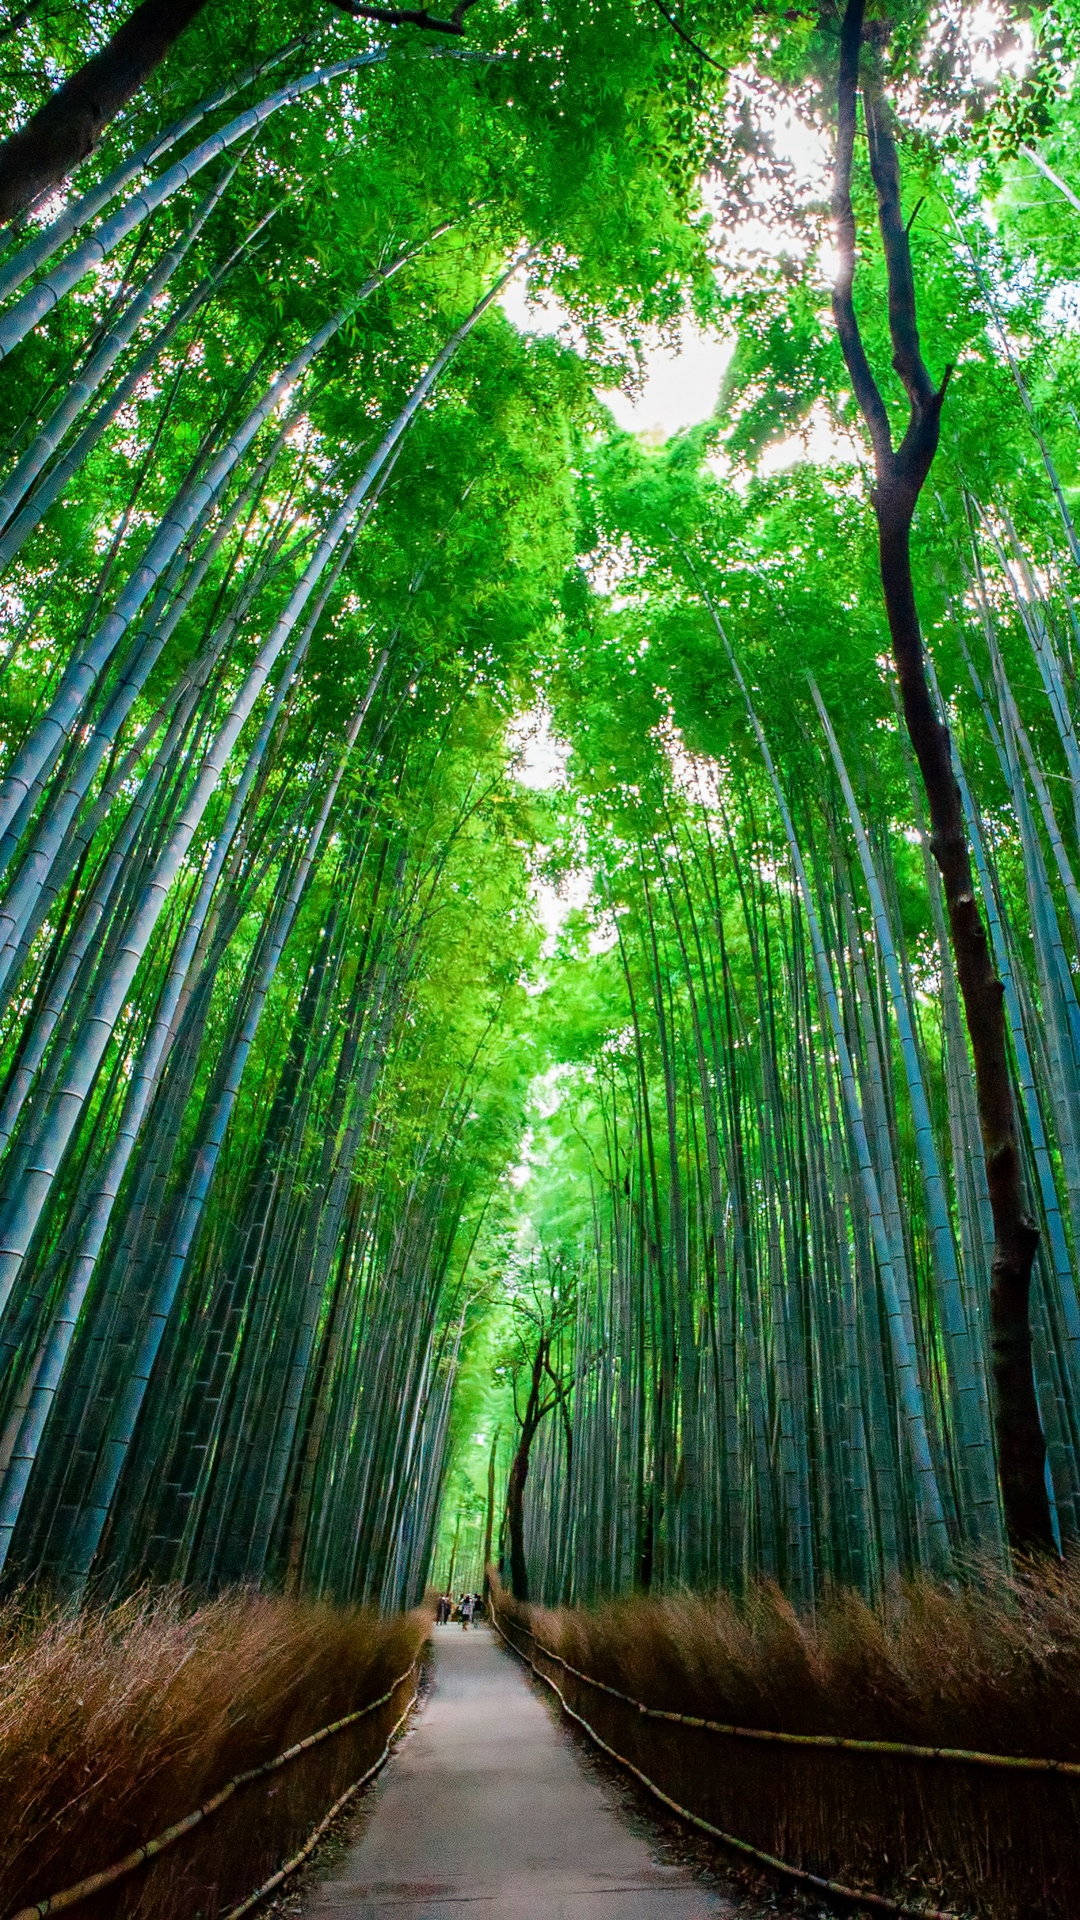 Bright Bamboo Forest Iphone With Pathway